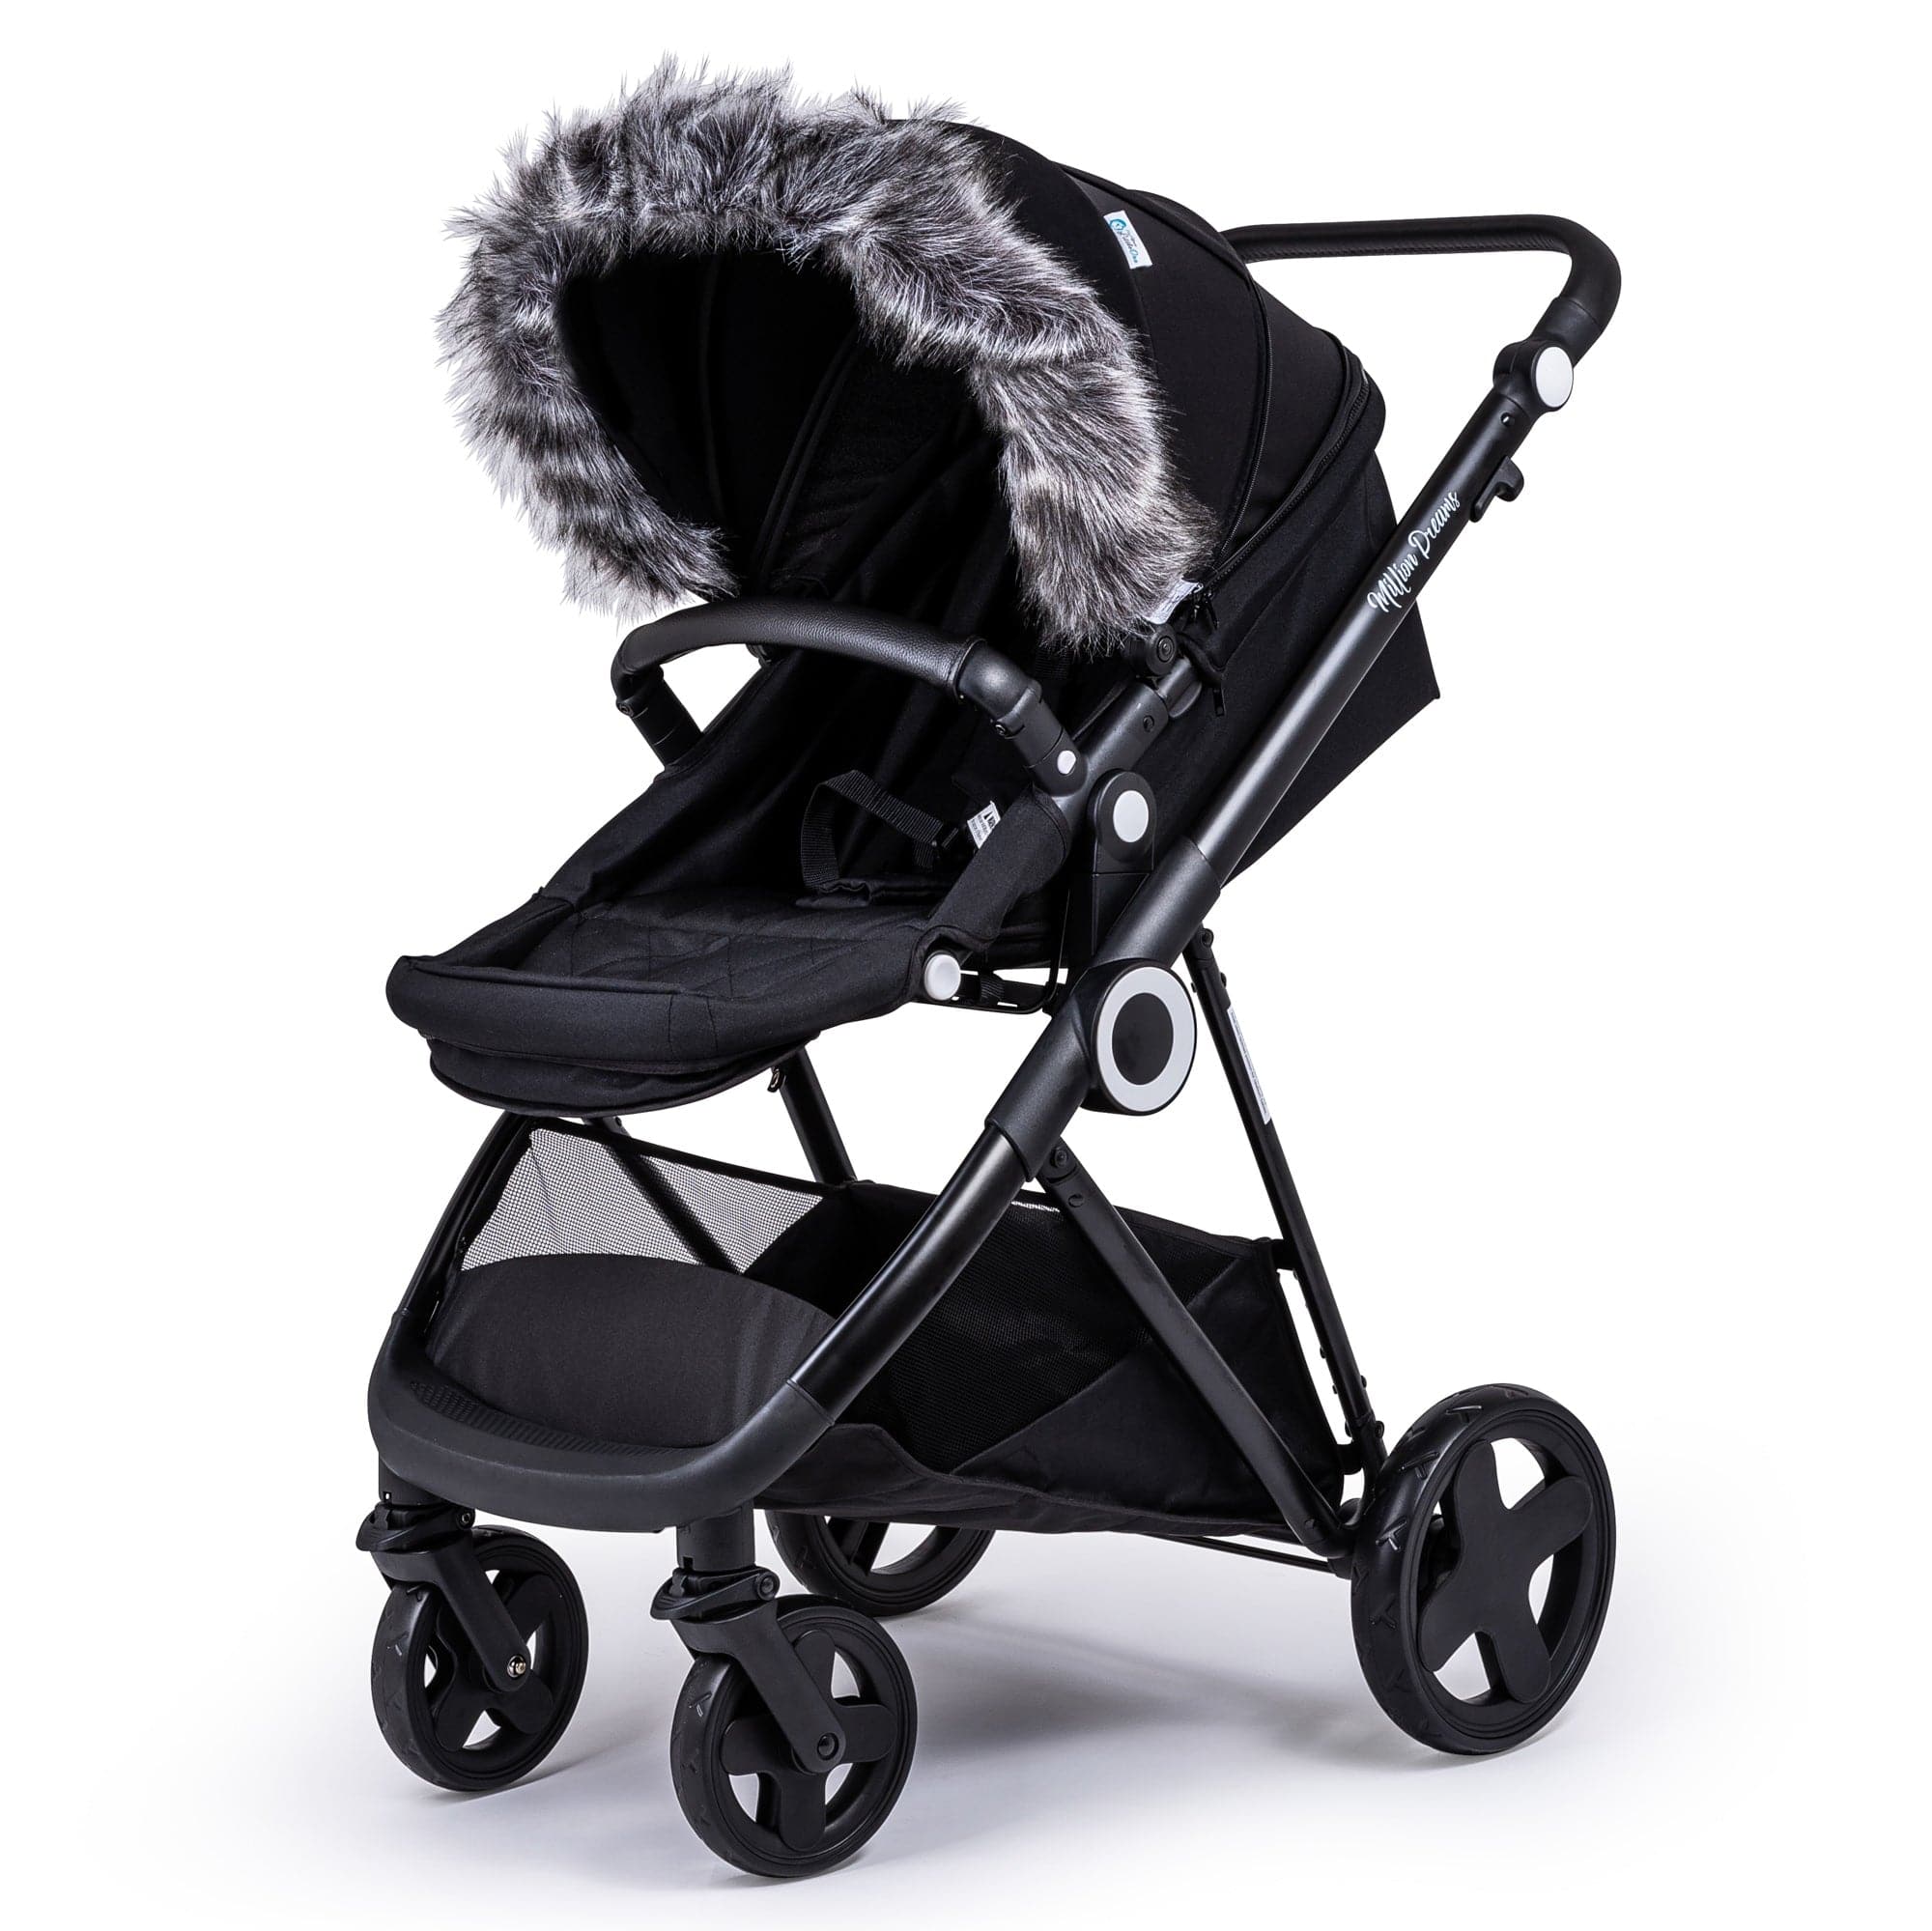 Pram Fur Hood Trim Attachment For Pushchair Compatible with Unilove - Dark Grey / Fits All Models | For Your Little One